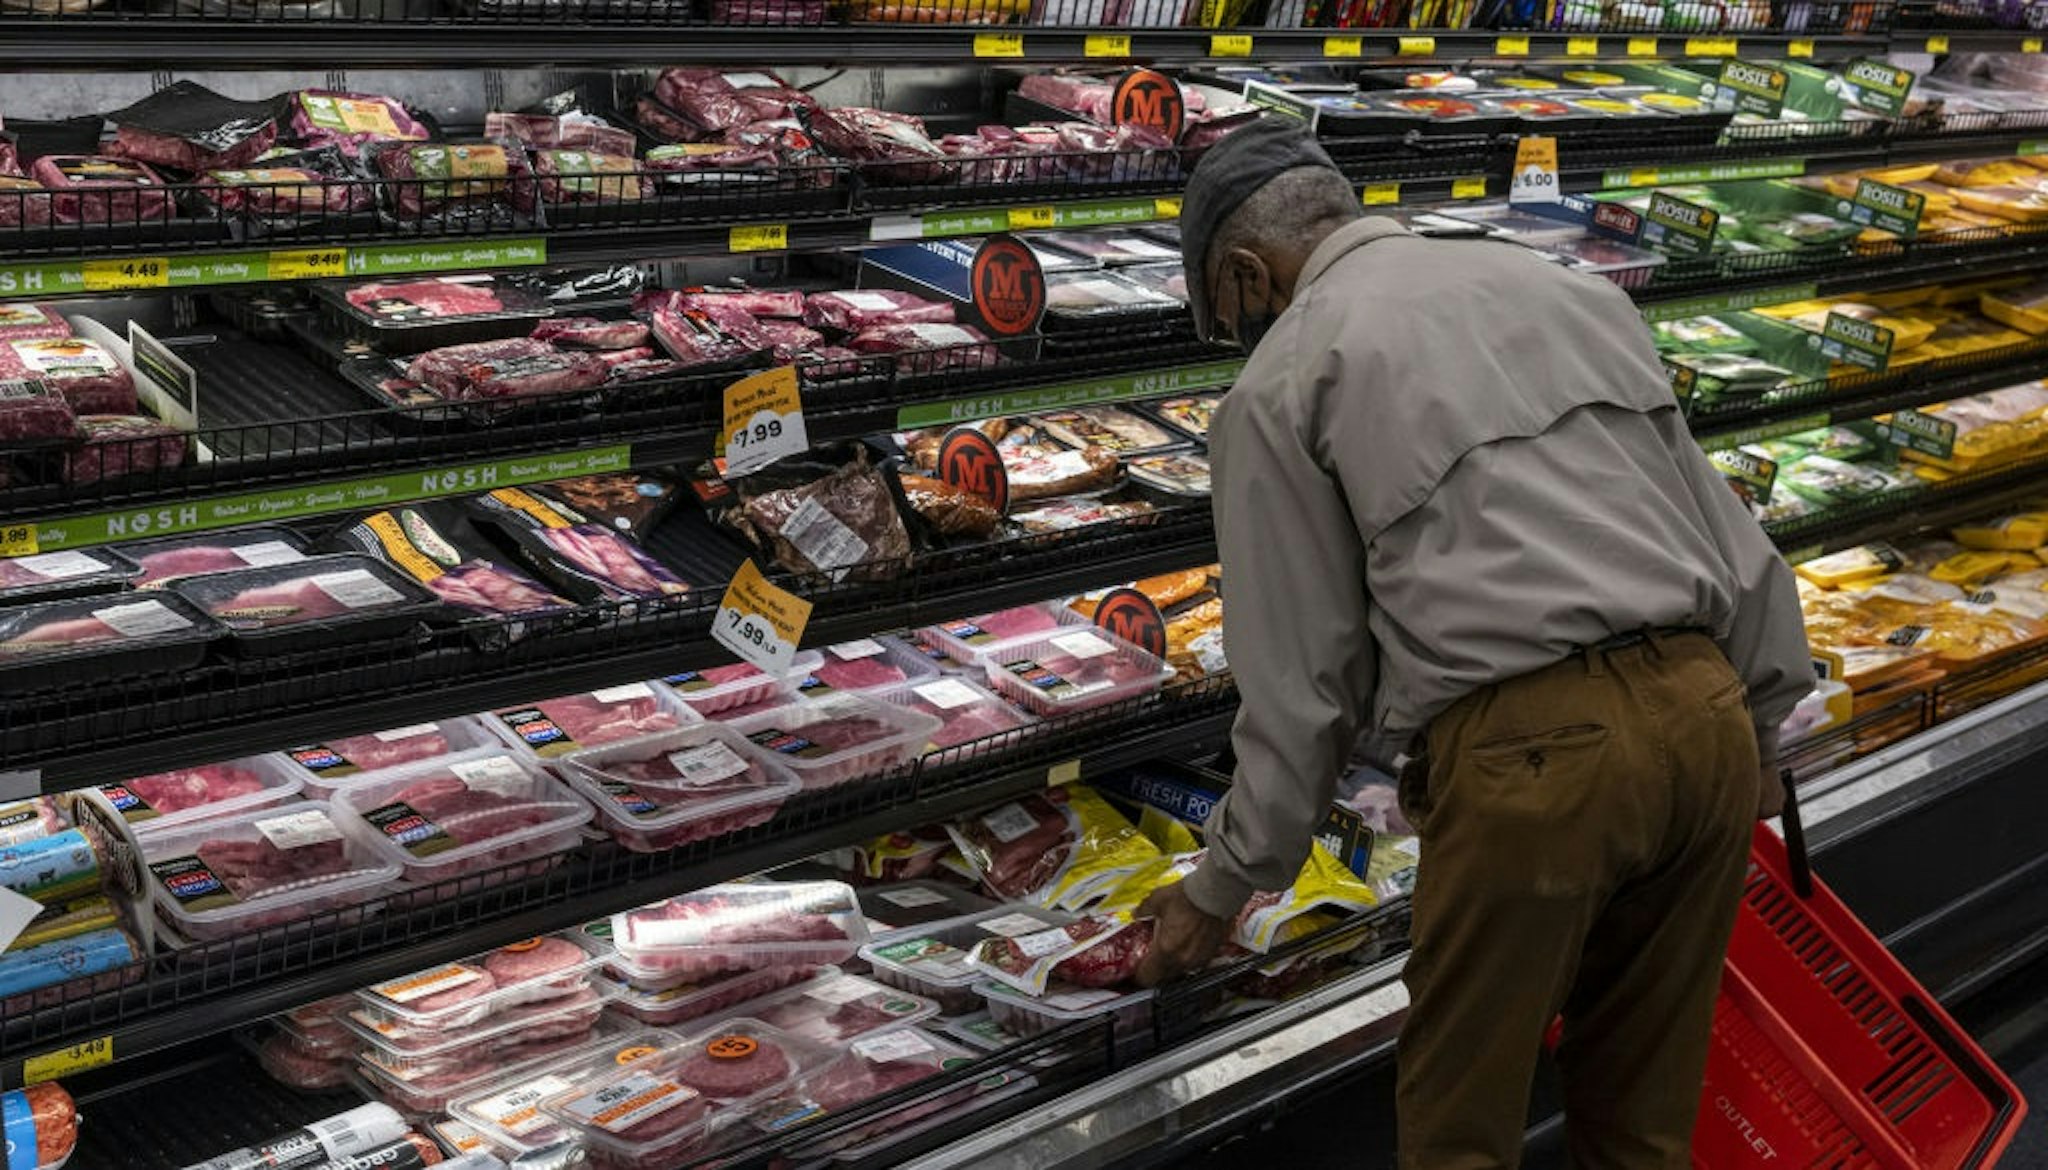 A customer shops in the meat aisle of a store in San Francisco, California, U.S., on Thursday, Nov. 11, 2021.